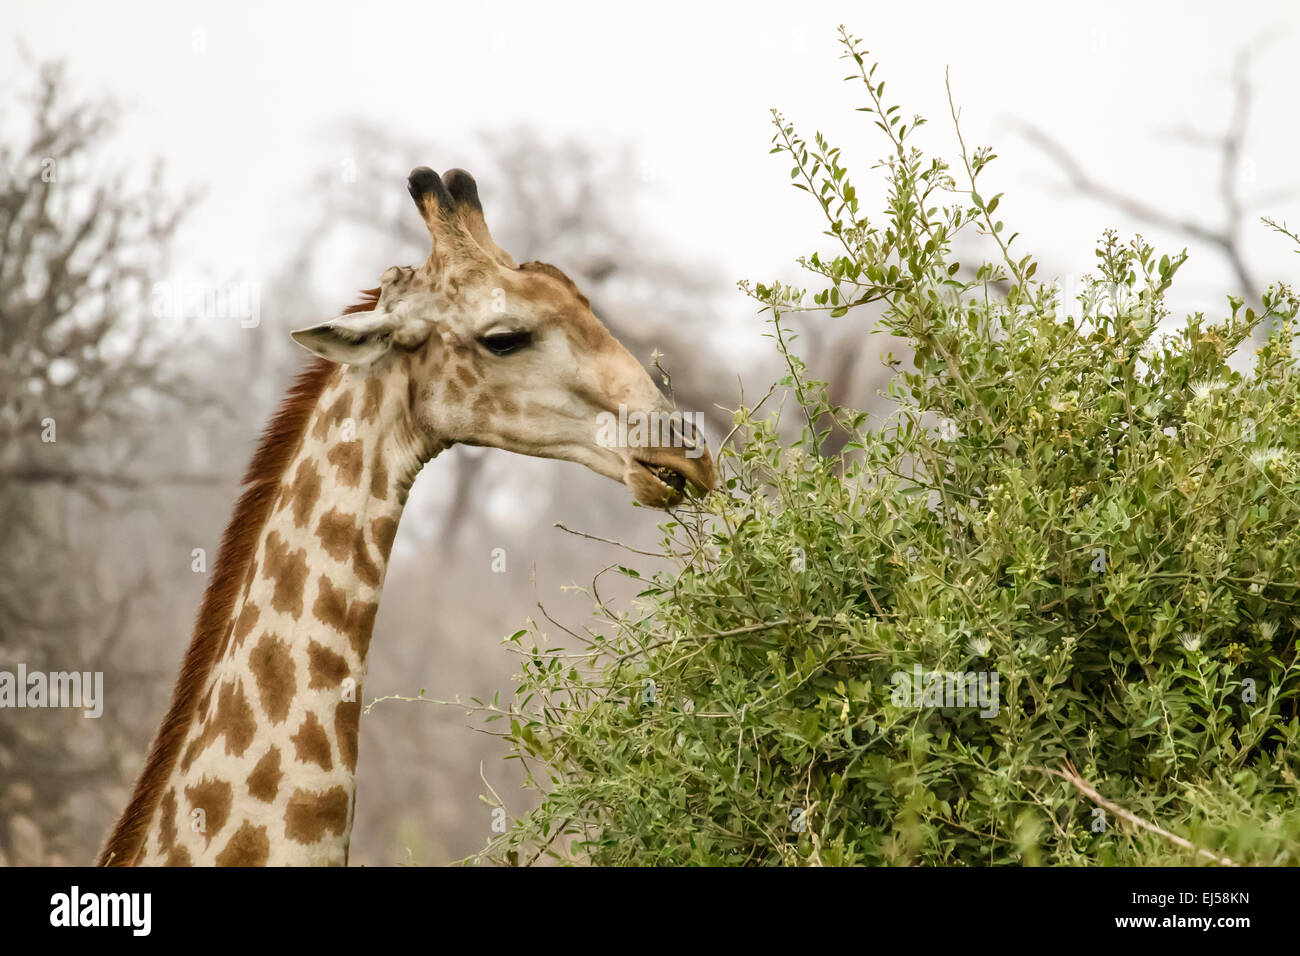 South African Giraffe head and shoulders view in Chobe National Park, Botswana, Africa Stock Photo